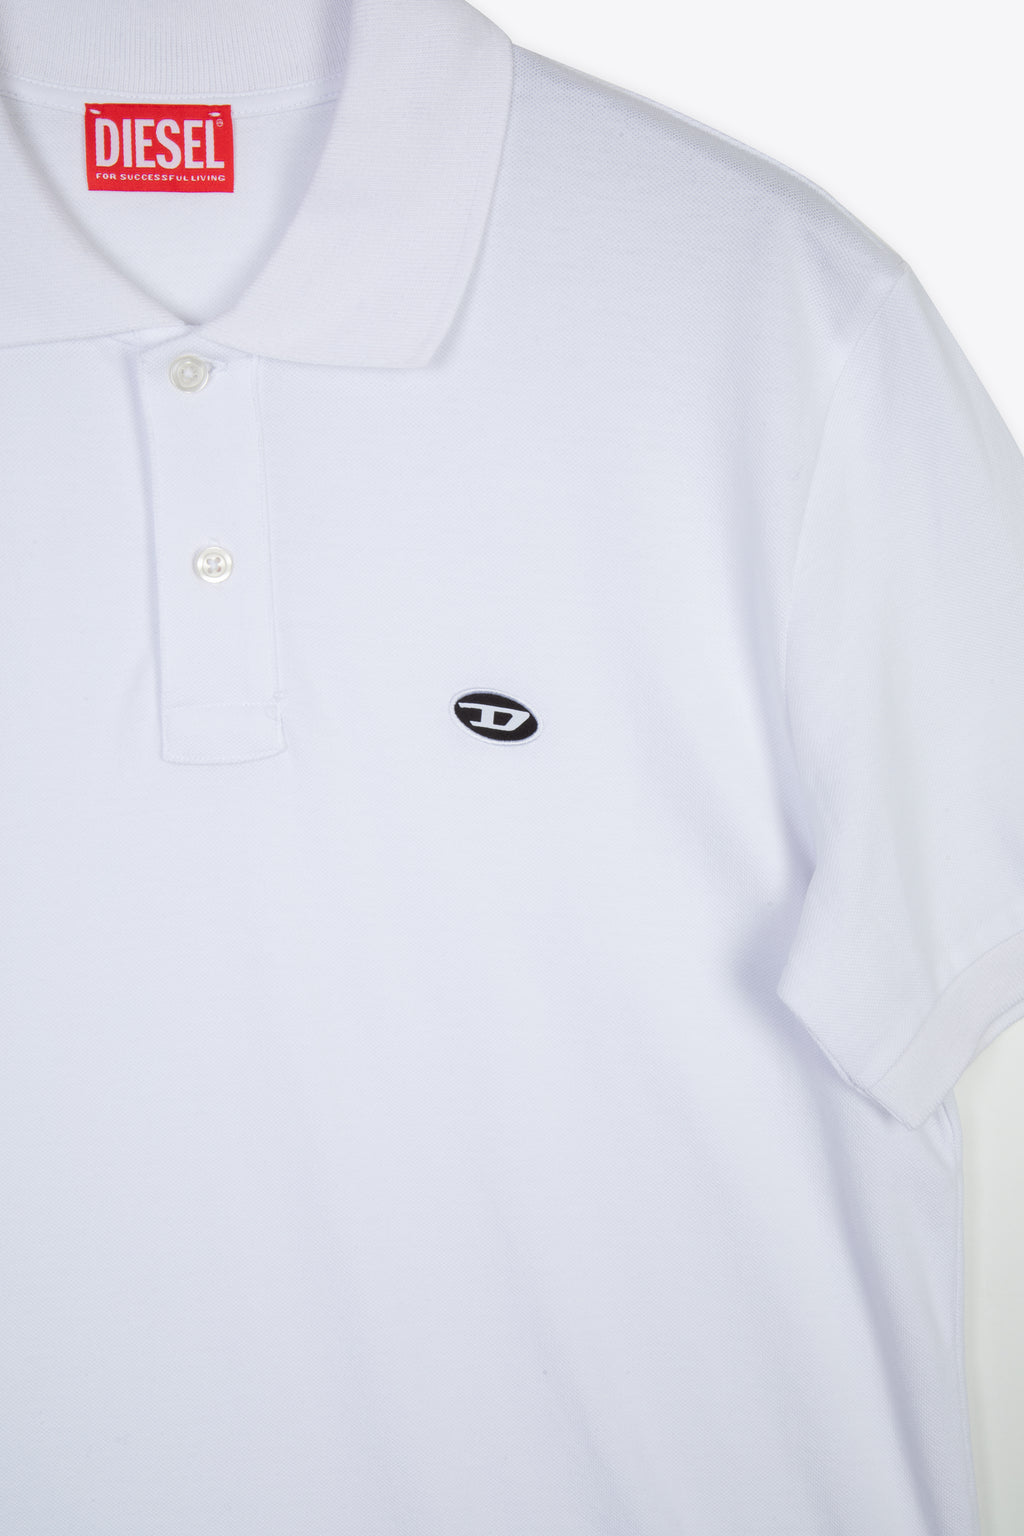 alt-image__White-polo-shirt-with-Oval-D-logo-patch---T-Smith-Doval-Pj
